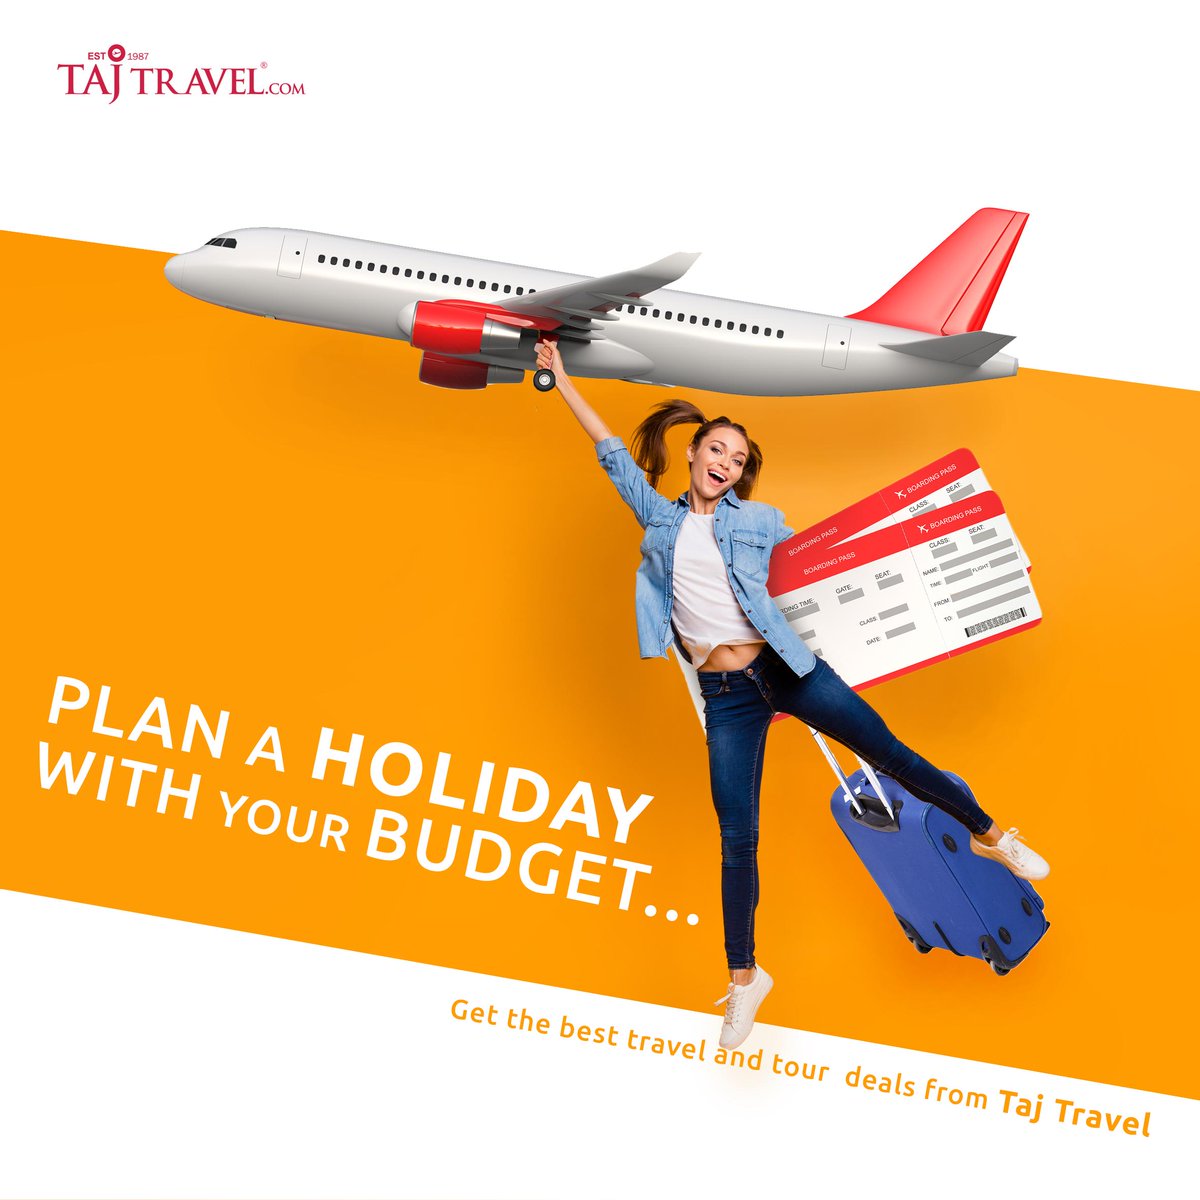 Are you worried about traveling cost? Taj Travel gives you good flight deals so that you can plan a holiday within your budget. Now, being on a budget will never stop you from exploring the world.

#TajTravel #flighttickets #cheapflightticket #cheapflight #travel #tour #holidays